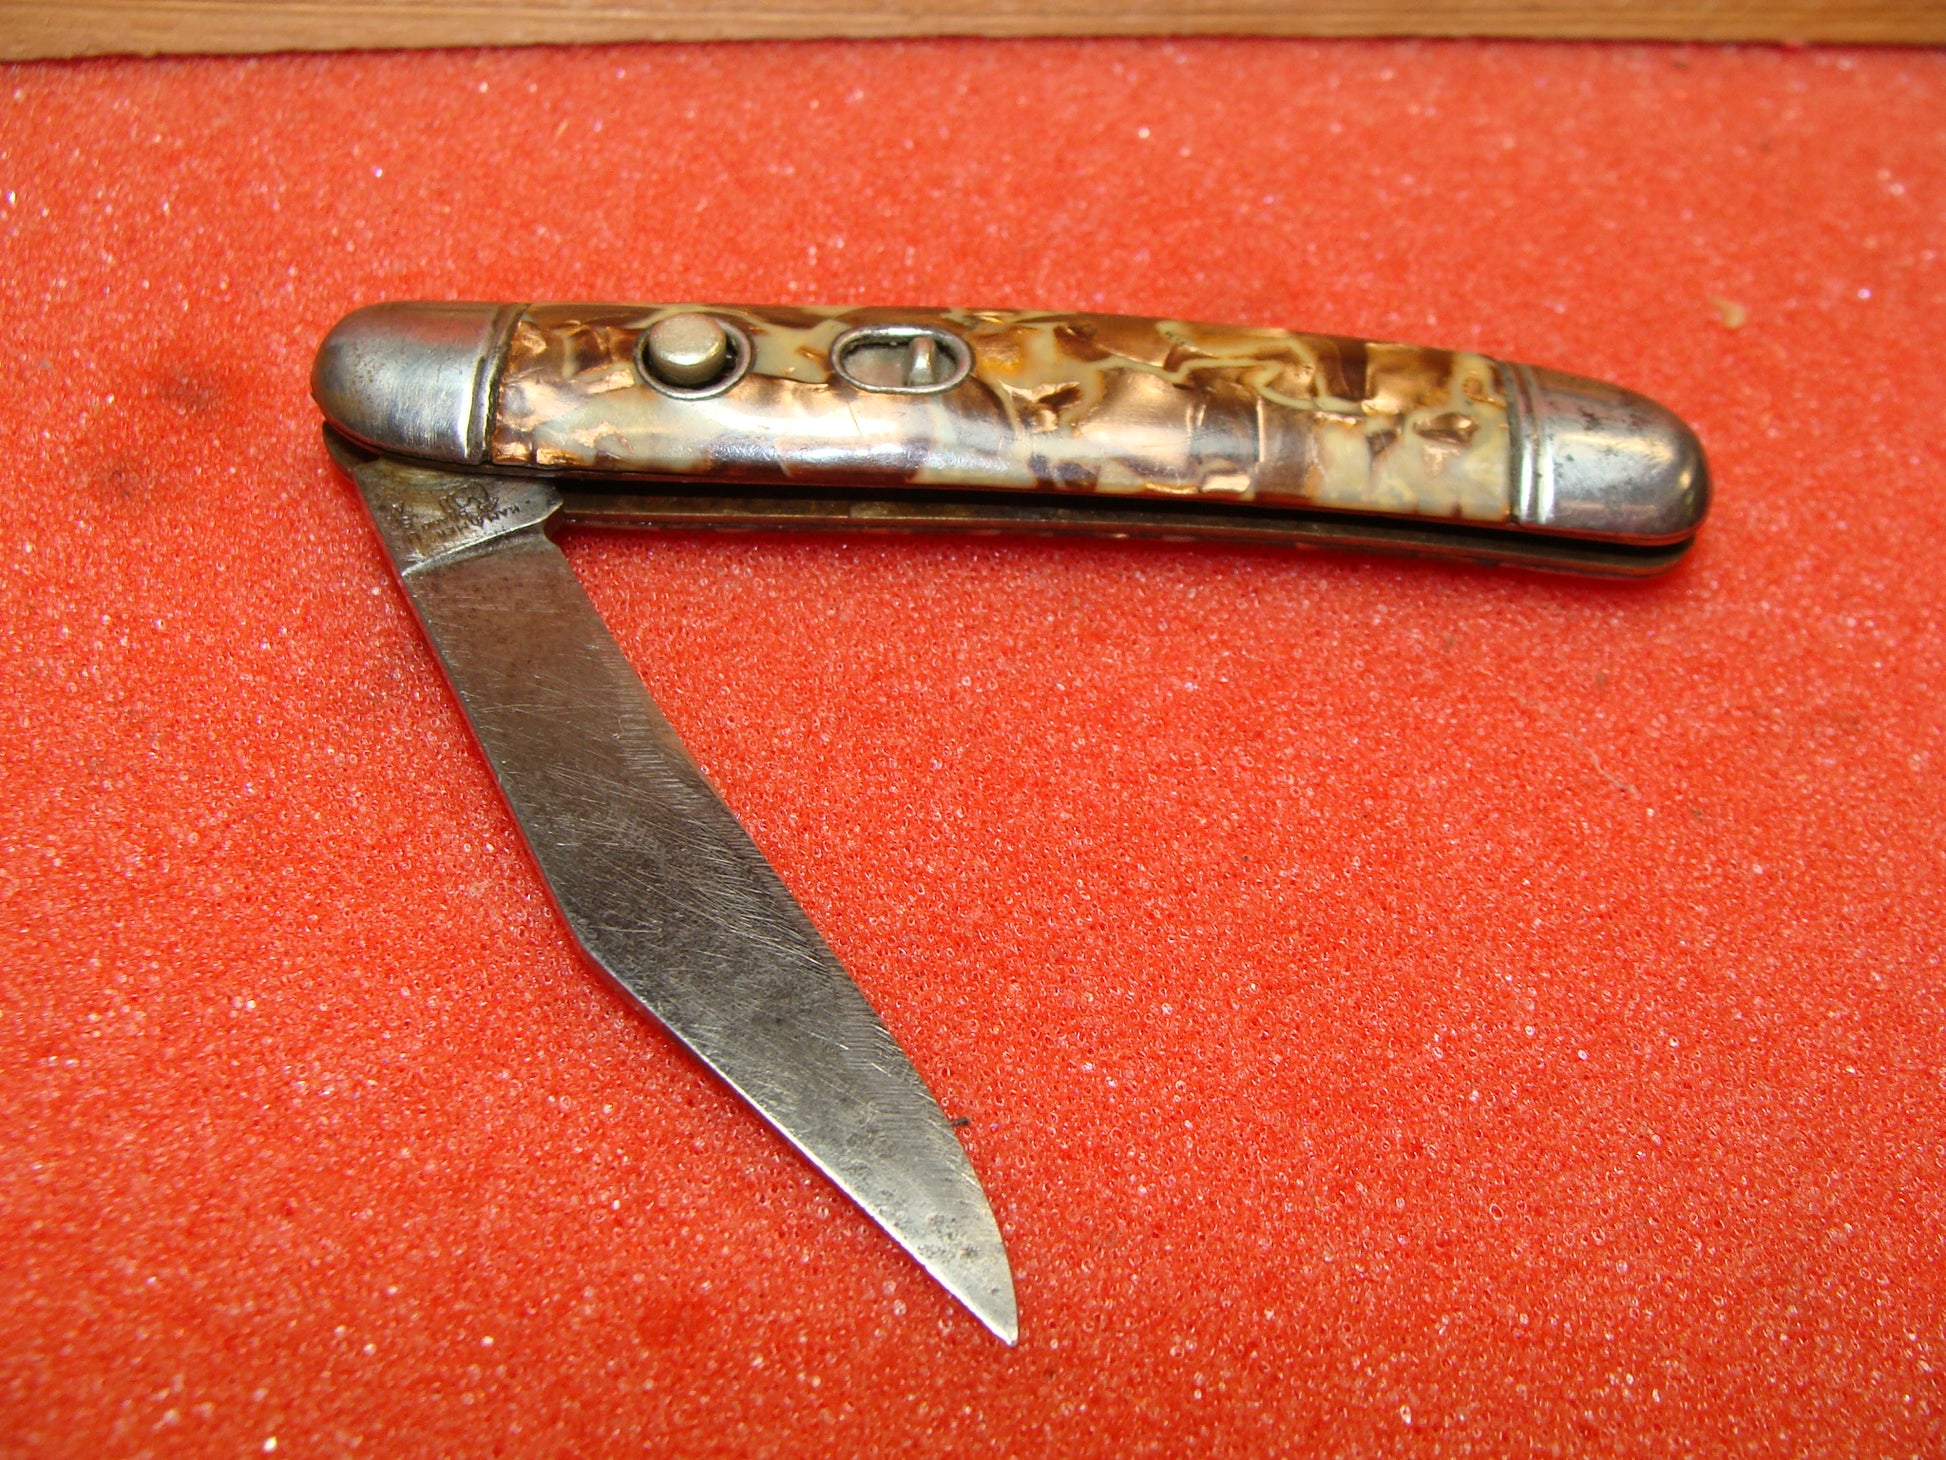 HAMMER BRAND IMPERIAL CUT 1945-55 VINTAGE AMERICAN AUTOMATIC KNIFE 3 1 –  Latham's Vintage Sales